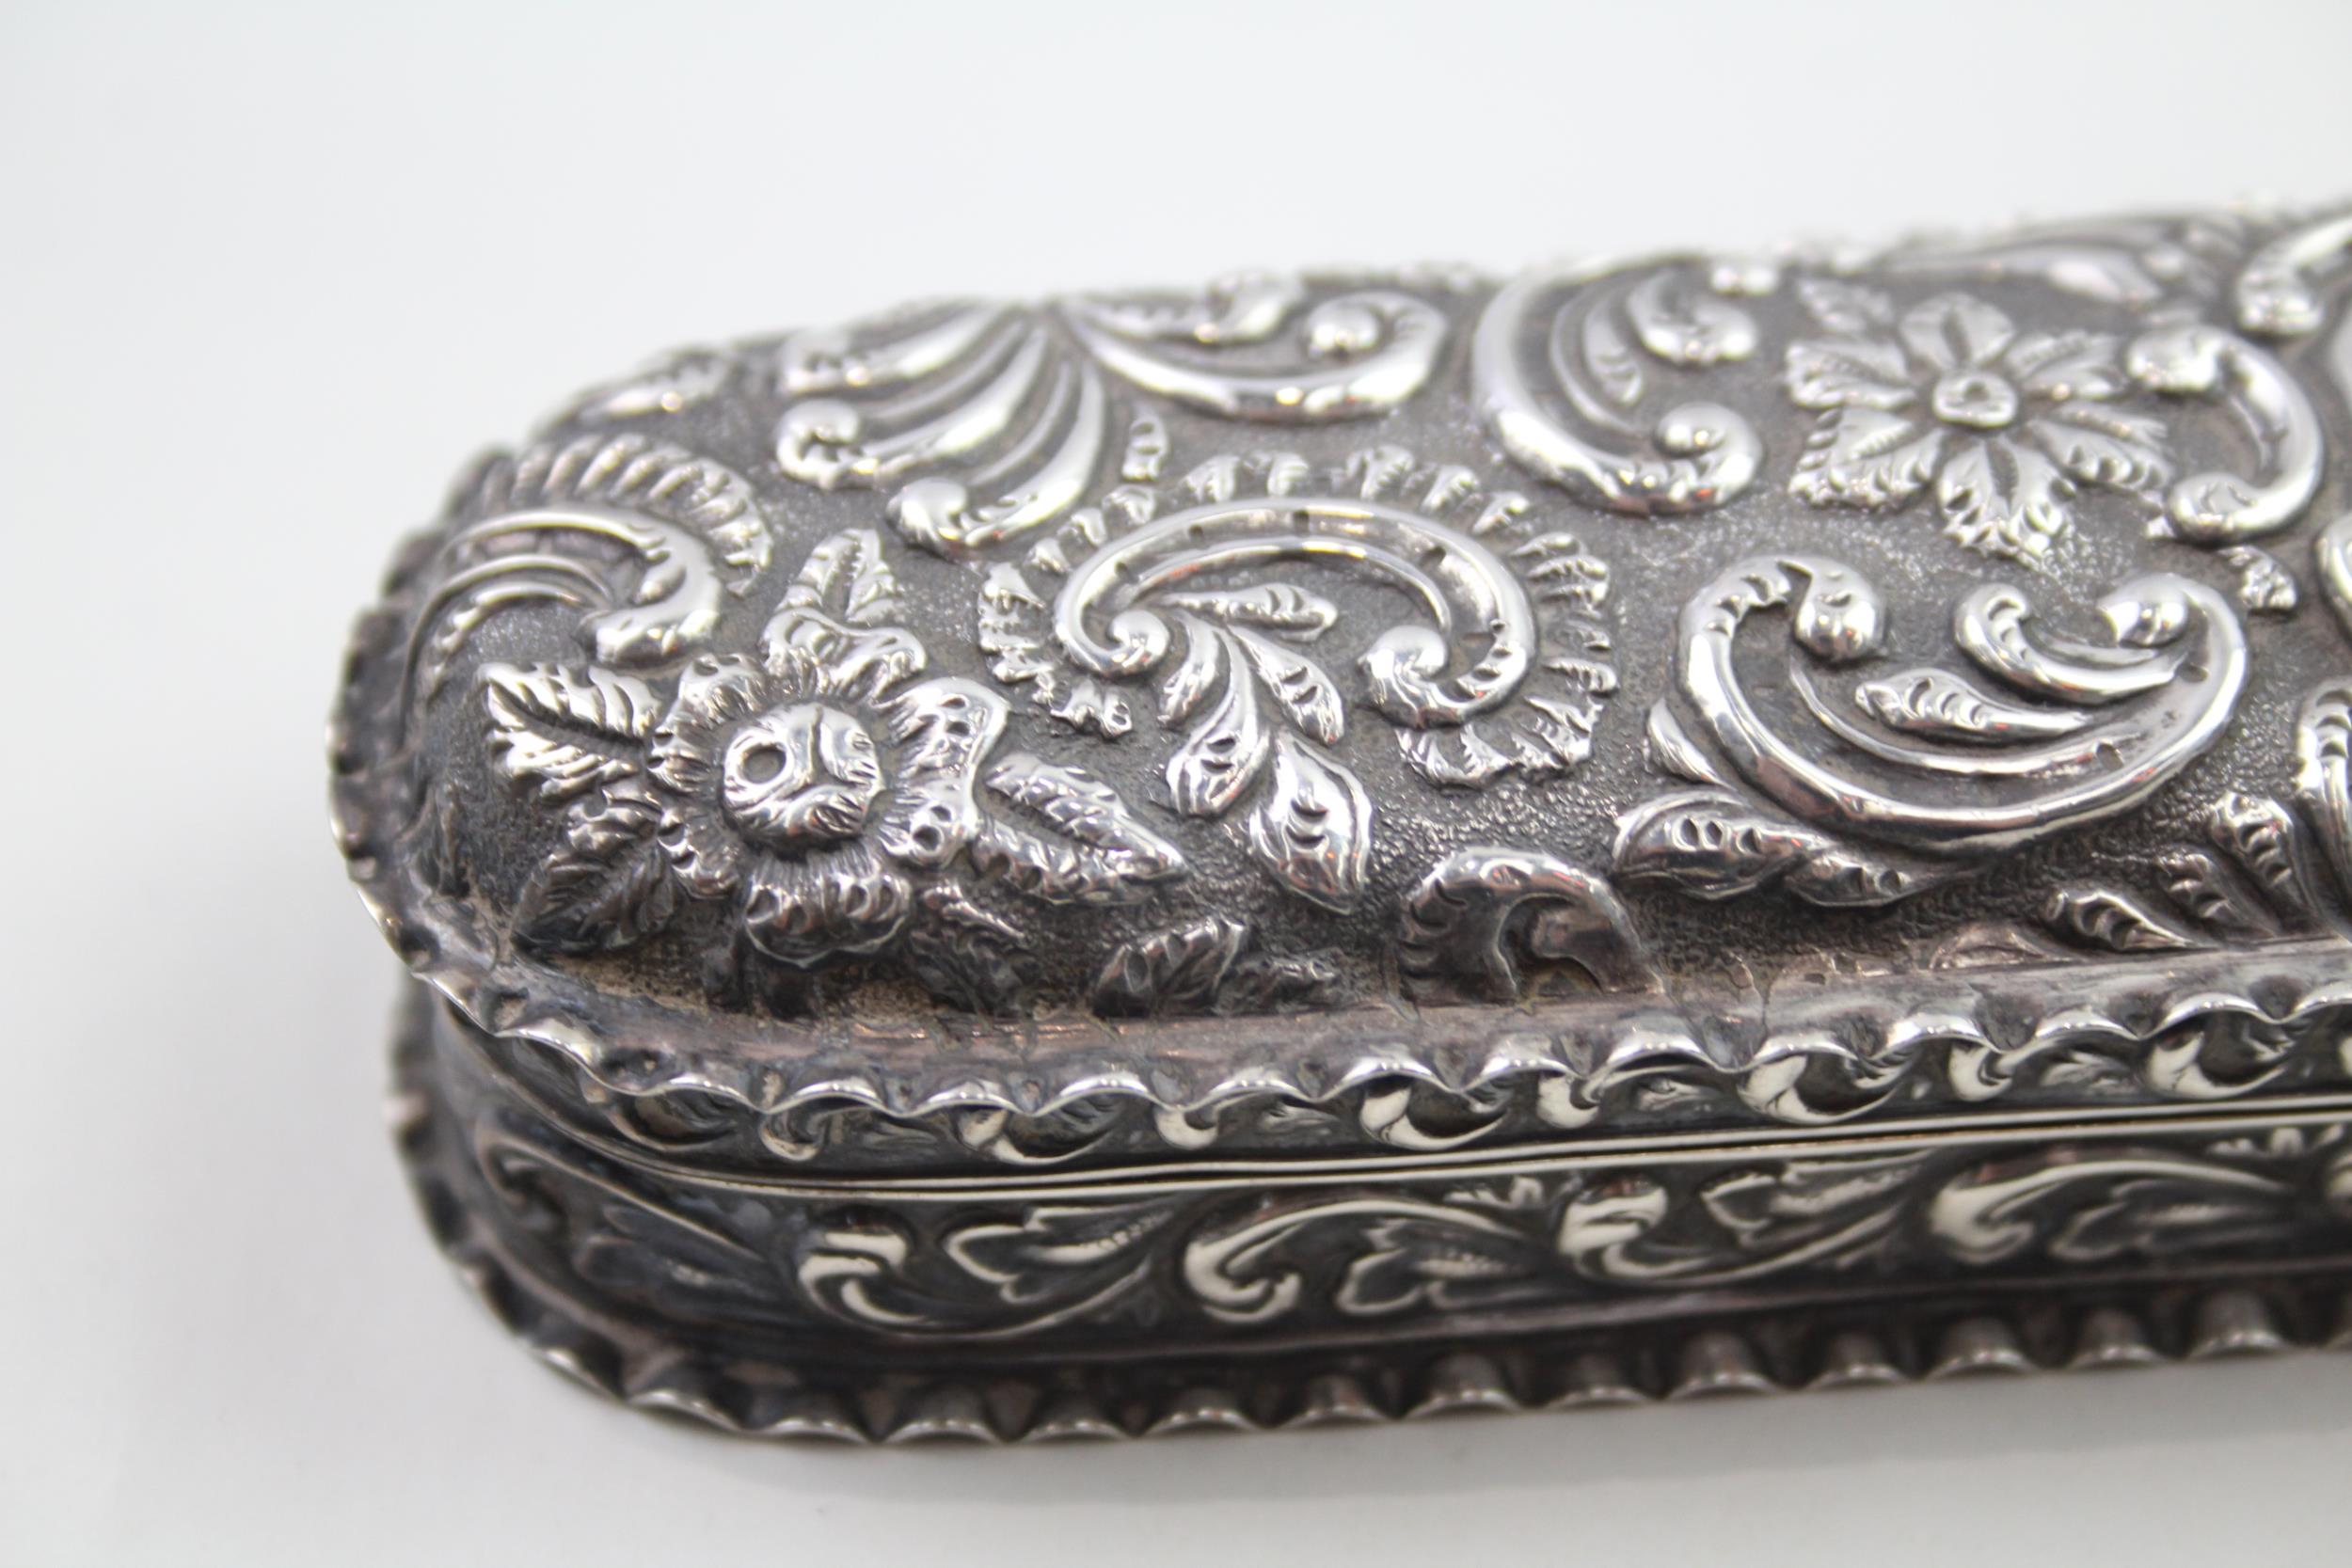 Antique Edwardian 1902 Chester Sterling Silver Long Trinket / Jewellery Box 129g - w/ Engraved - Image 2 of 8